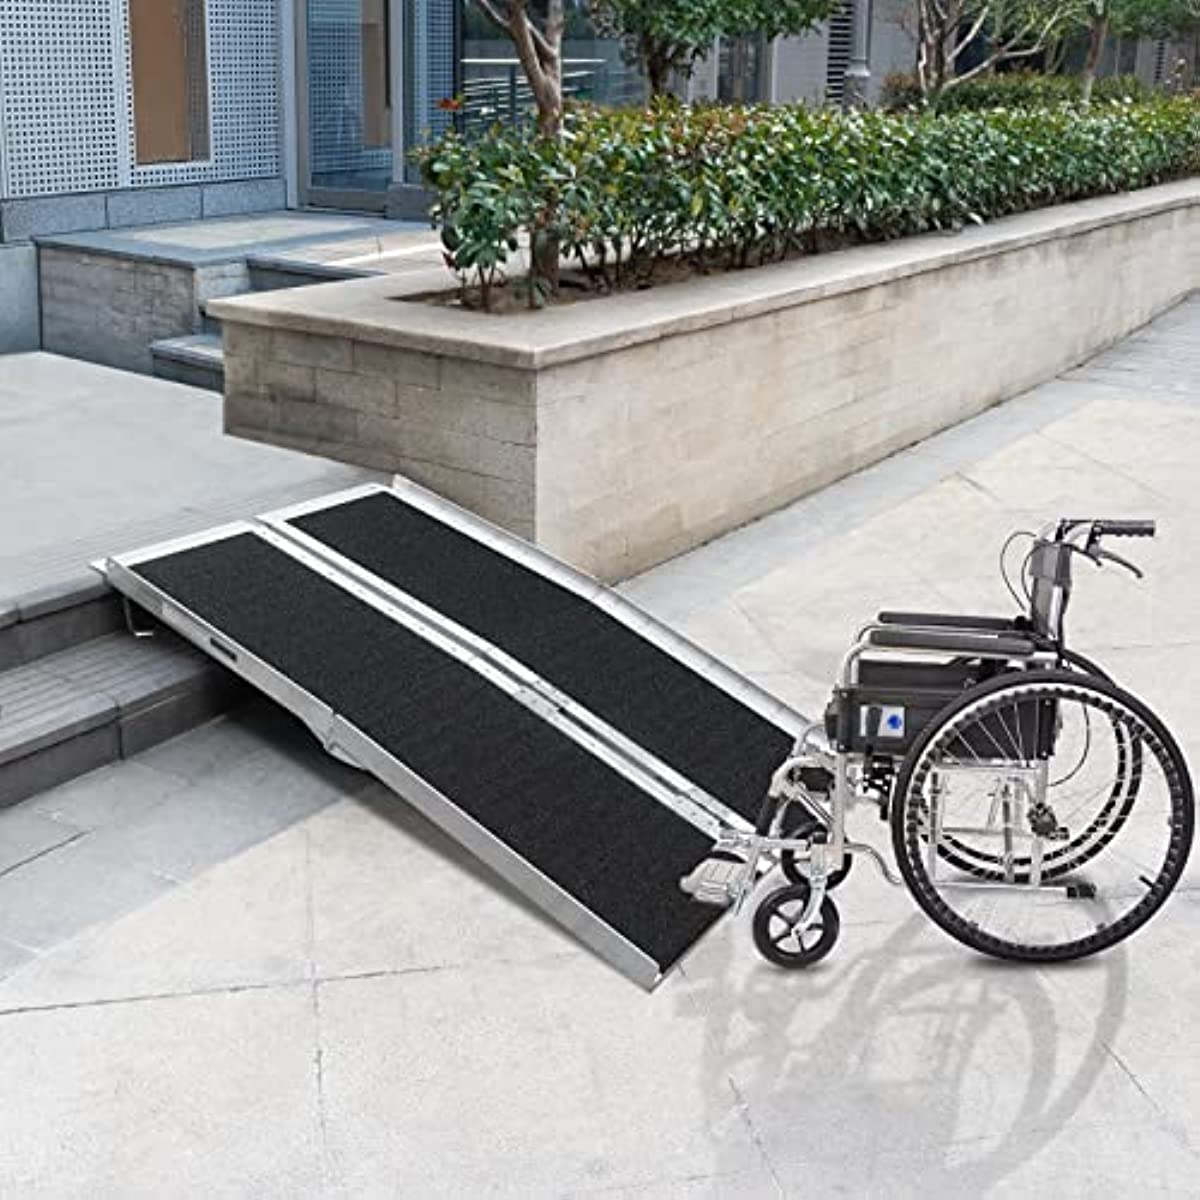 Non Skid Portable Wheelchair Ramp Multi Fold 4FT, Aluminum Foldable Mobility Scooter Ramp, Suitcase with Handle, Holds Up to 600lbs, for Home, Steps, Stairs, Doorways